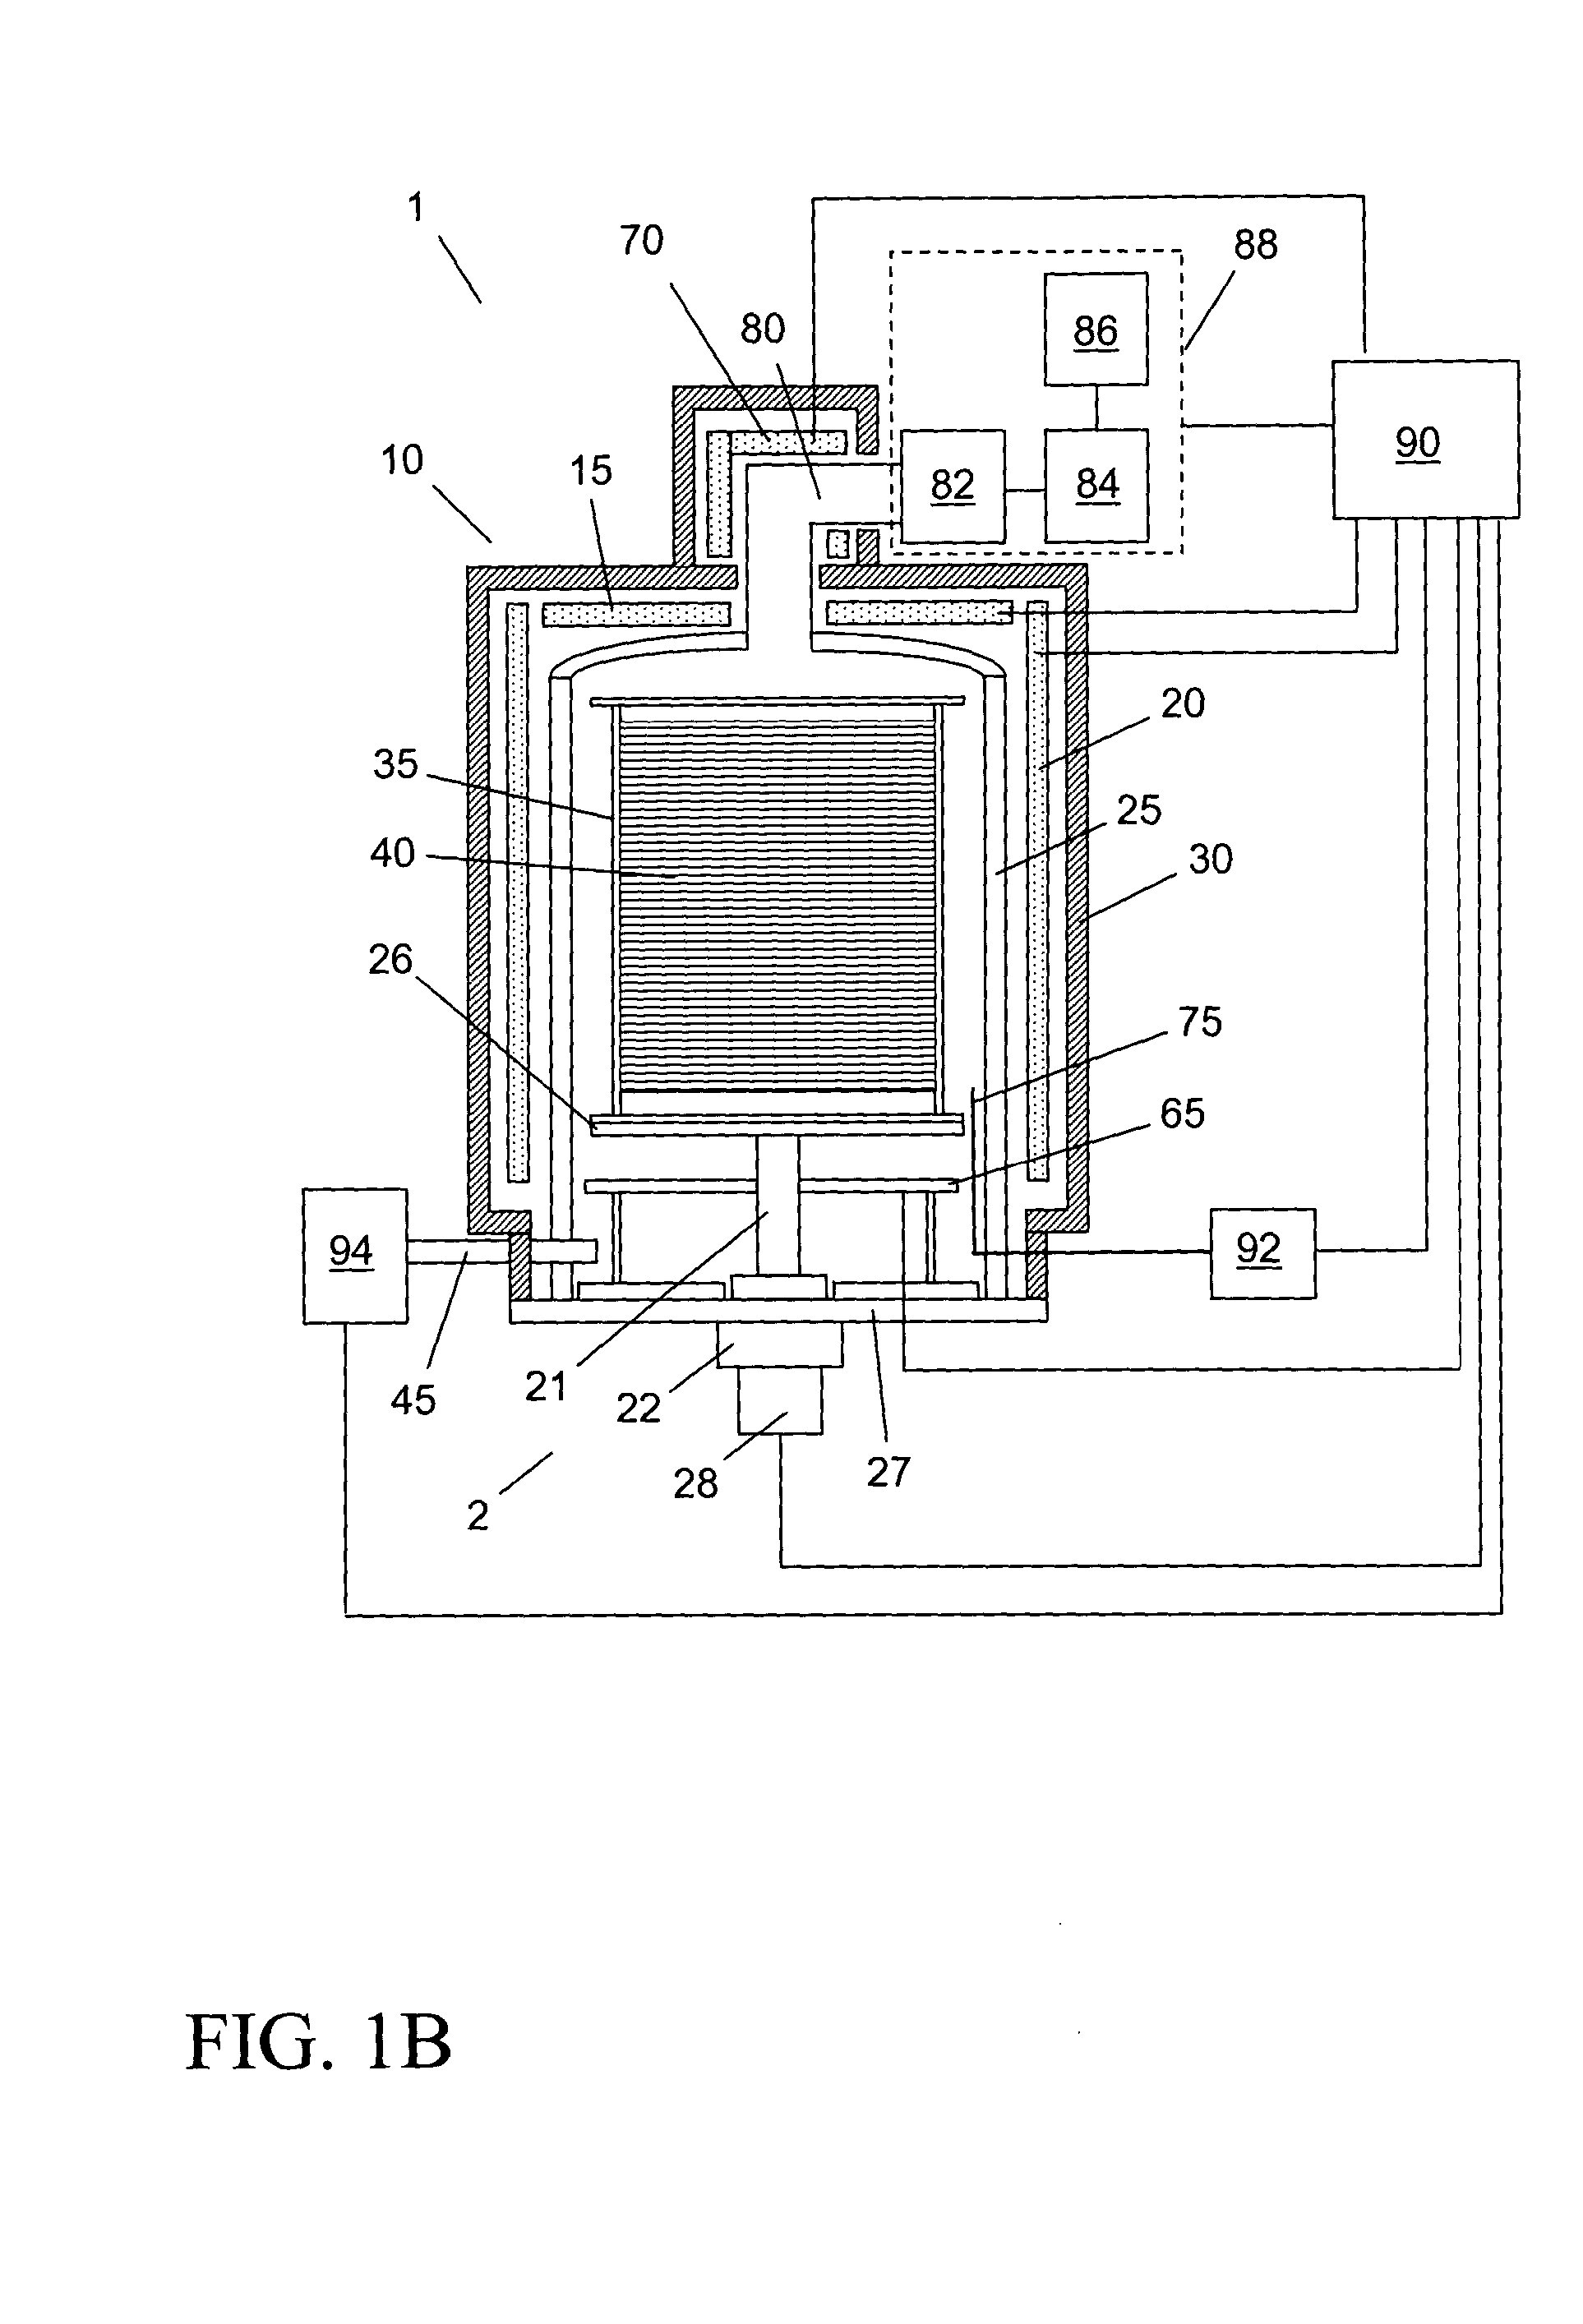 Formation of a metal-containing film by sequential gas exposure in a batch type processing system